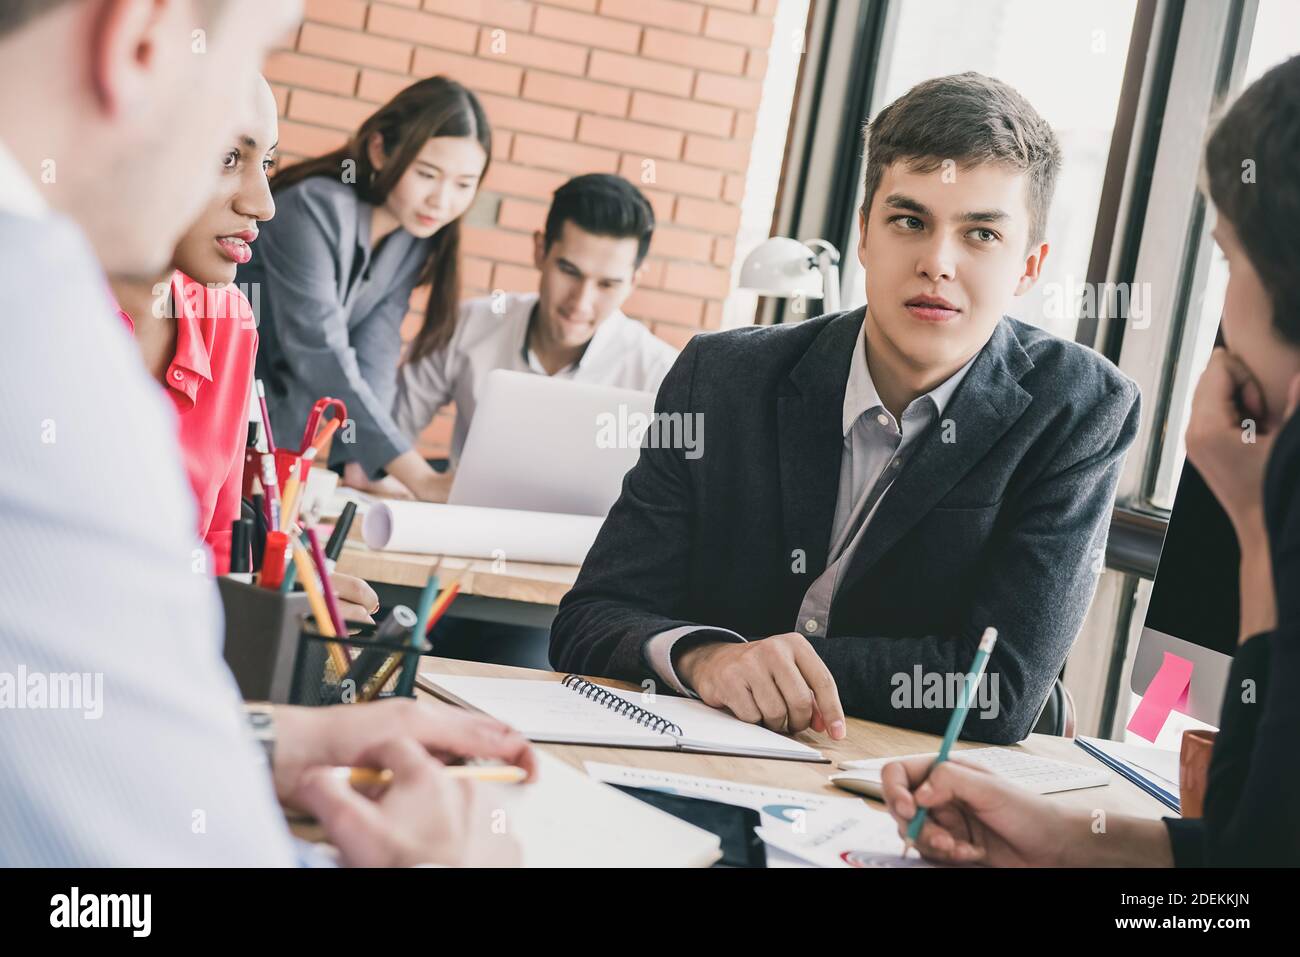 Young multiethnic business team meeting at the office desk seriously discussing project Stock Photo